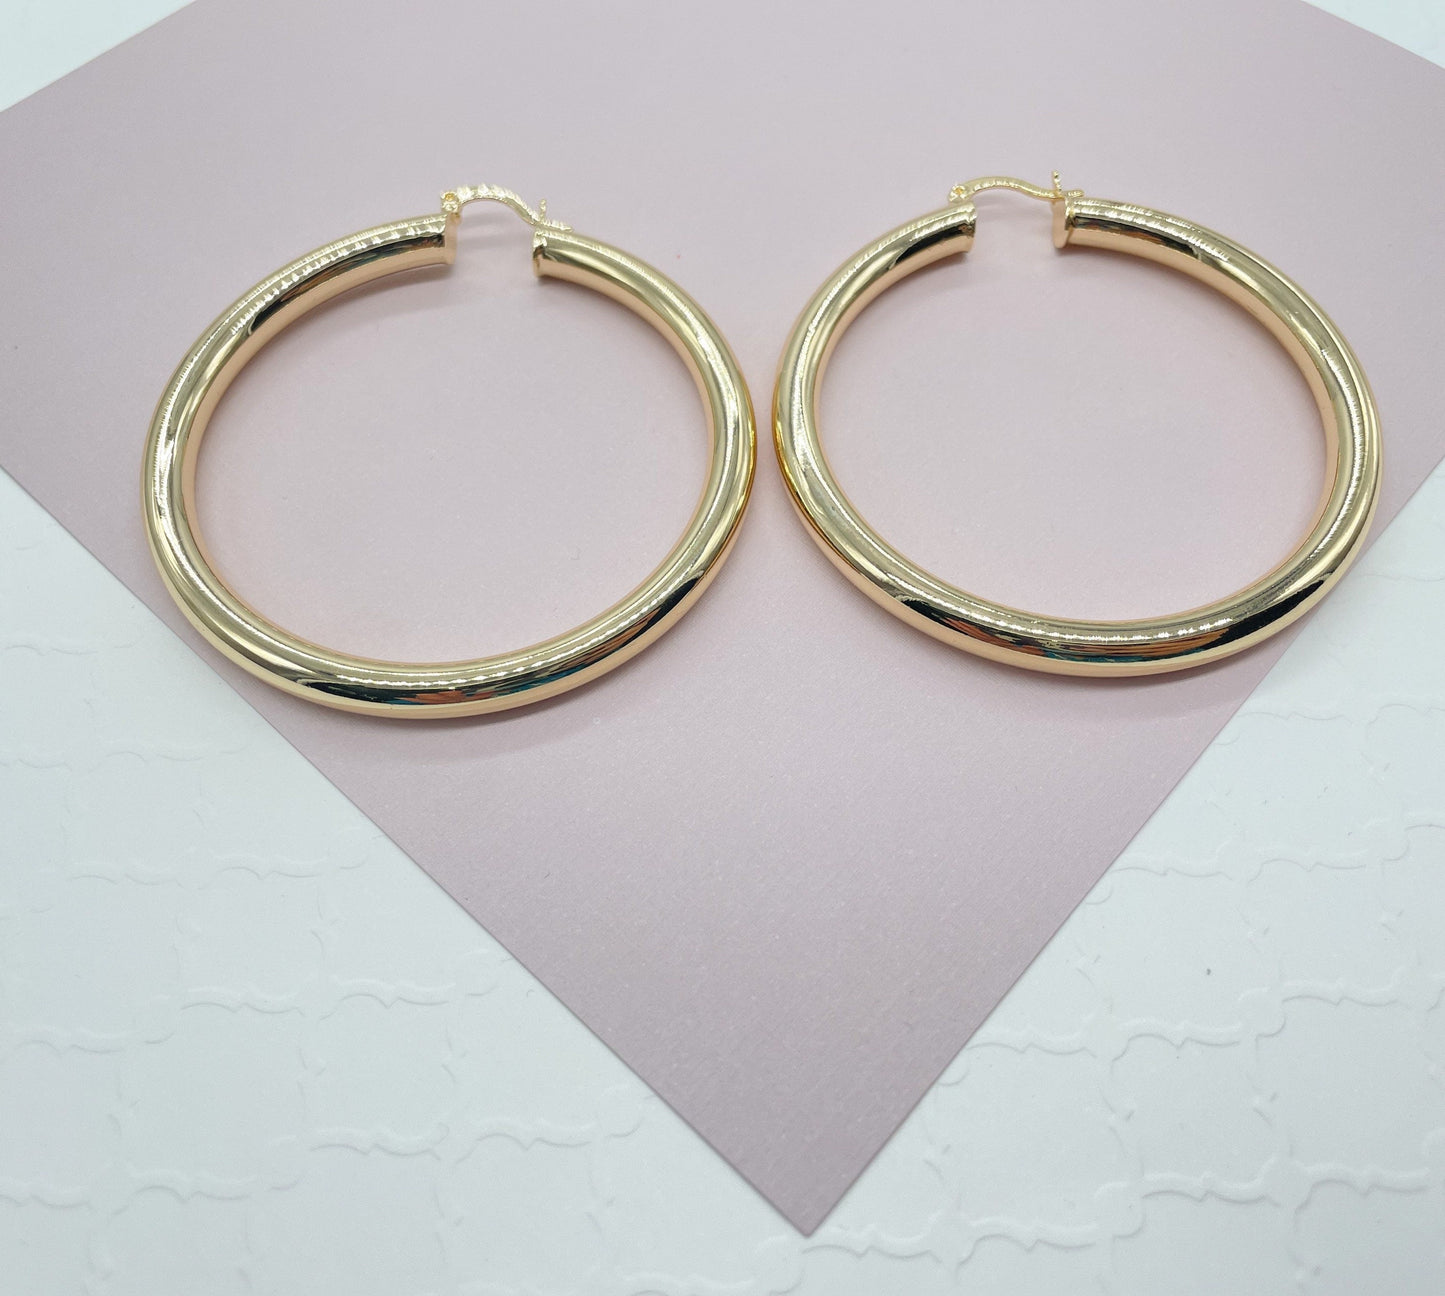 Large 18k Gold Layered Plain Hoop Earrings 2 inches or 50mm Diameter Wholesale